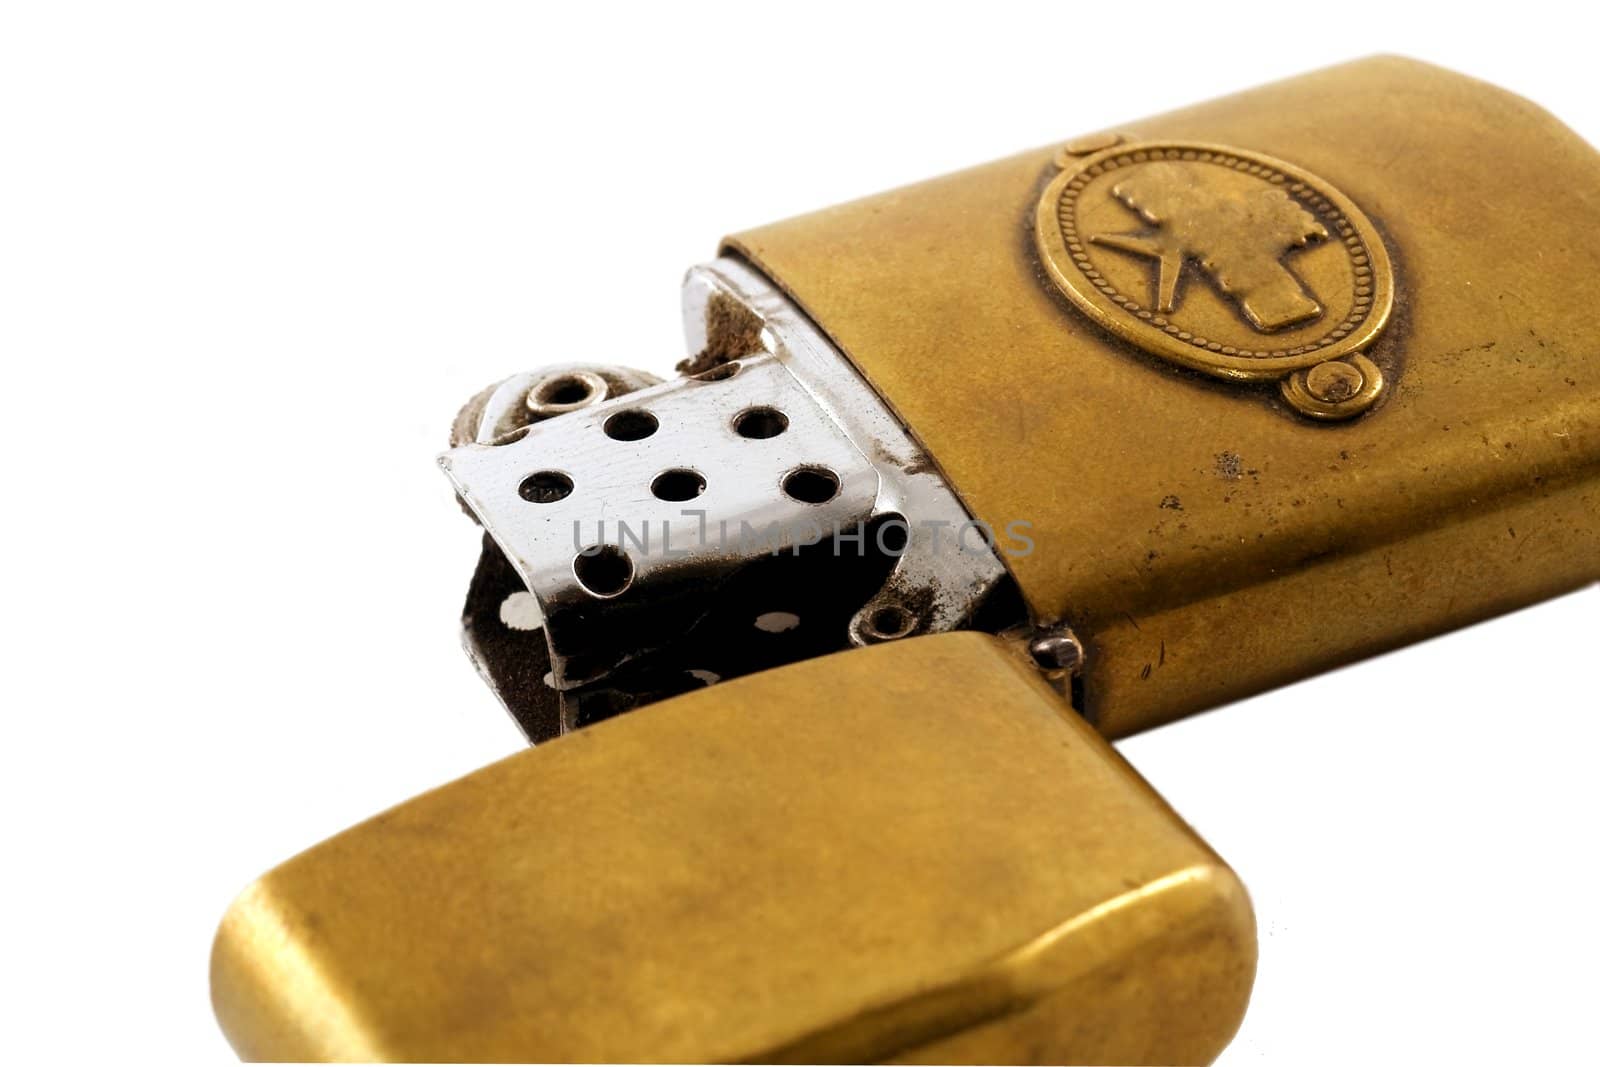 Old gasoline lighter on white background. Isolated object.